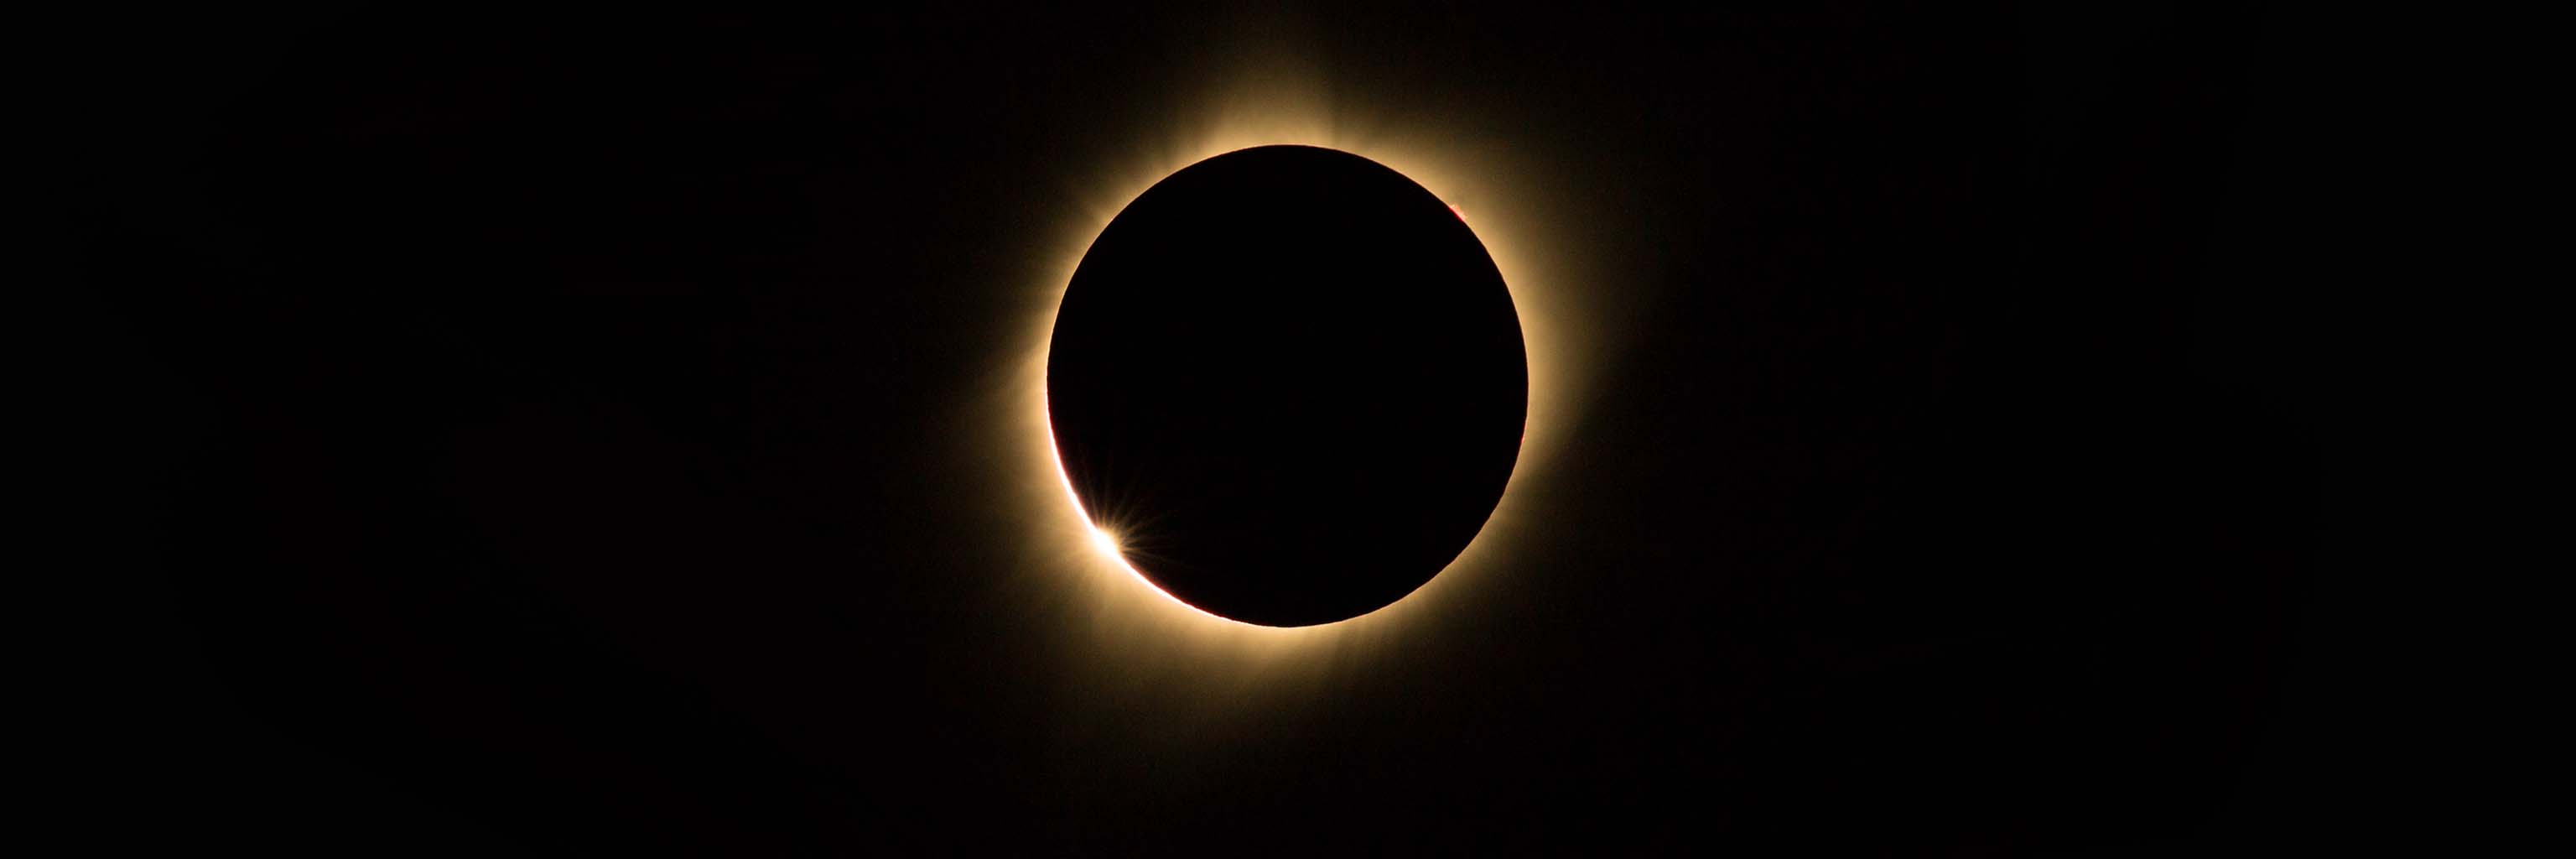 During the 2017 solar eclipse, the moon appeared as a dark circle over the sun. Light from the sun escaped from behind the moon, forming a thin circle of light around the moon. The sky behind is black.